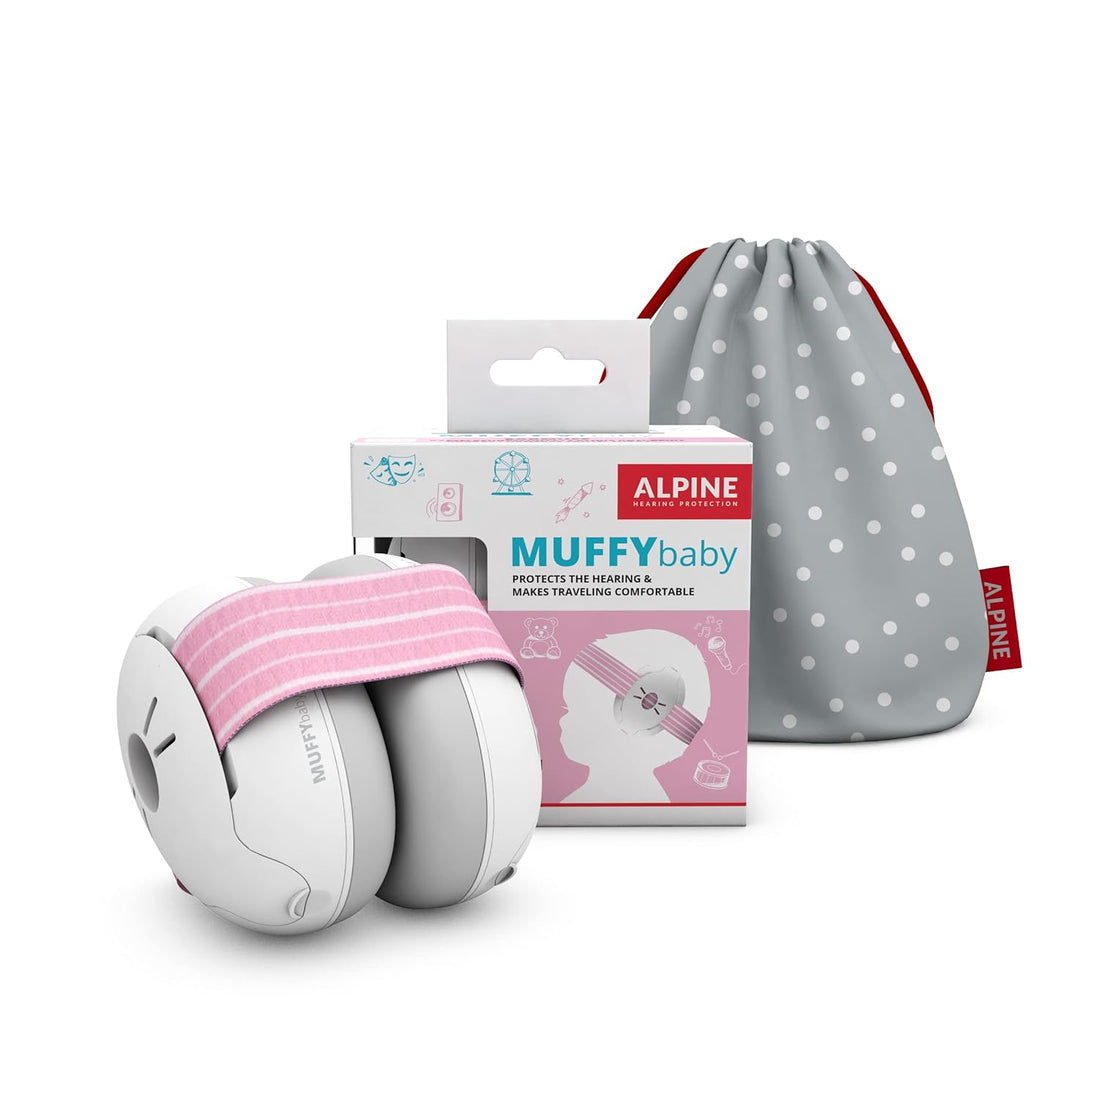 Alpine Muffy Baby Ear Muffs, Ear Protectors for Babies and Toddlers, Pink/White